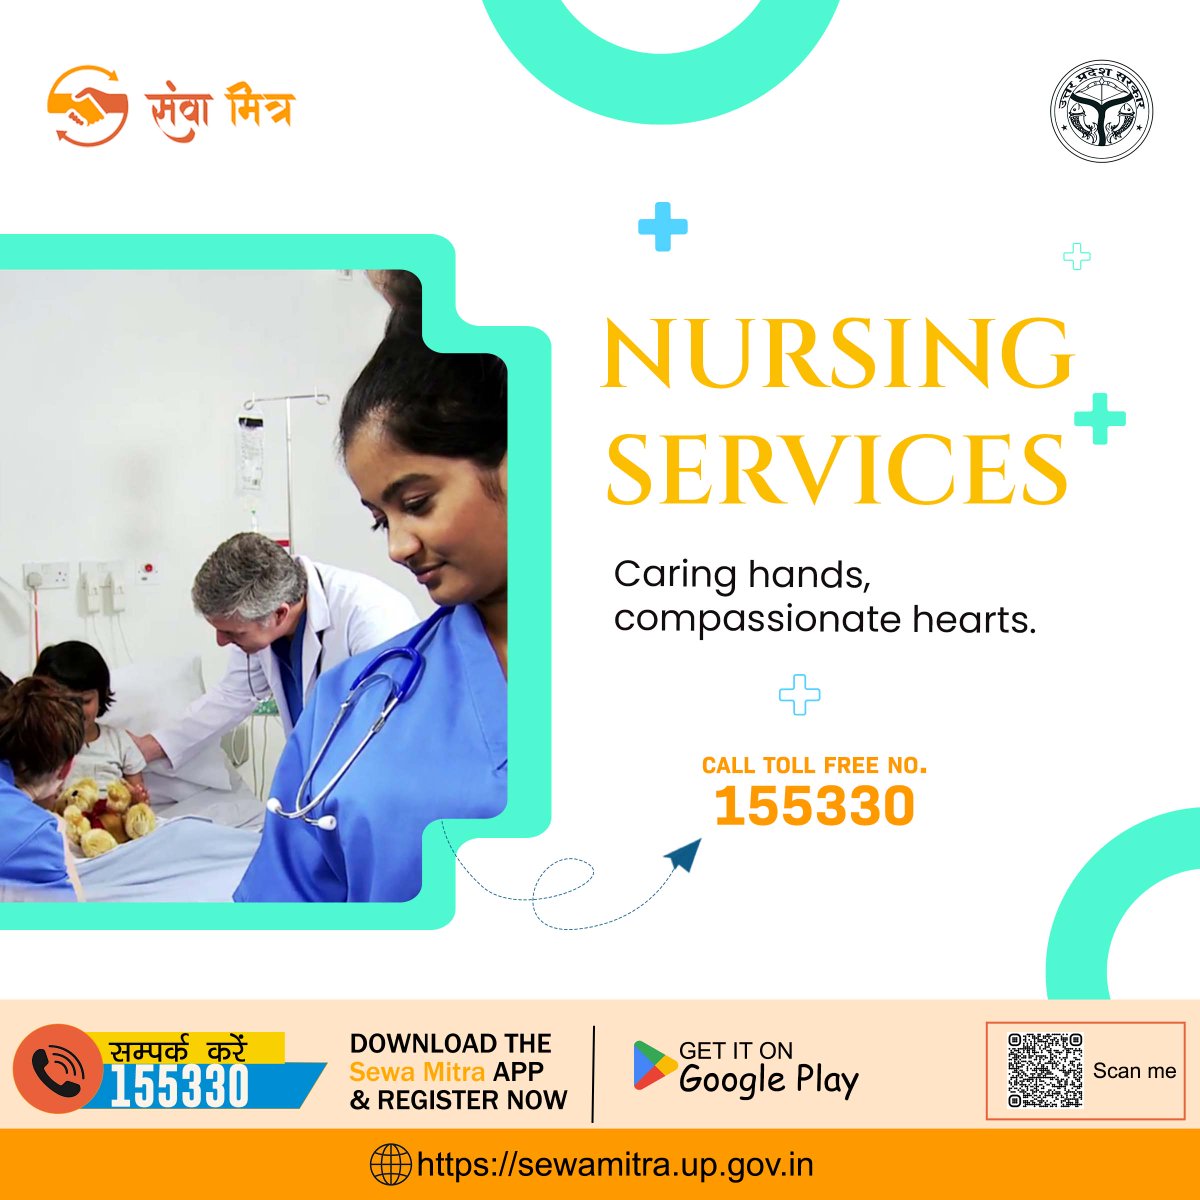 Get Ready to Be Treated Like Family, Pampered Like Royalty, and Healed with Our Nursing Services! 👩‍⚕️💪💉

Call Toll-Free no. 155330

#nursingservices #nurses #eldercare #patientcare #homehealthcare #healthcareheroes #sewamitra #sewamitraservices